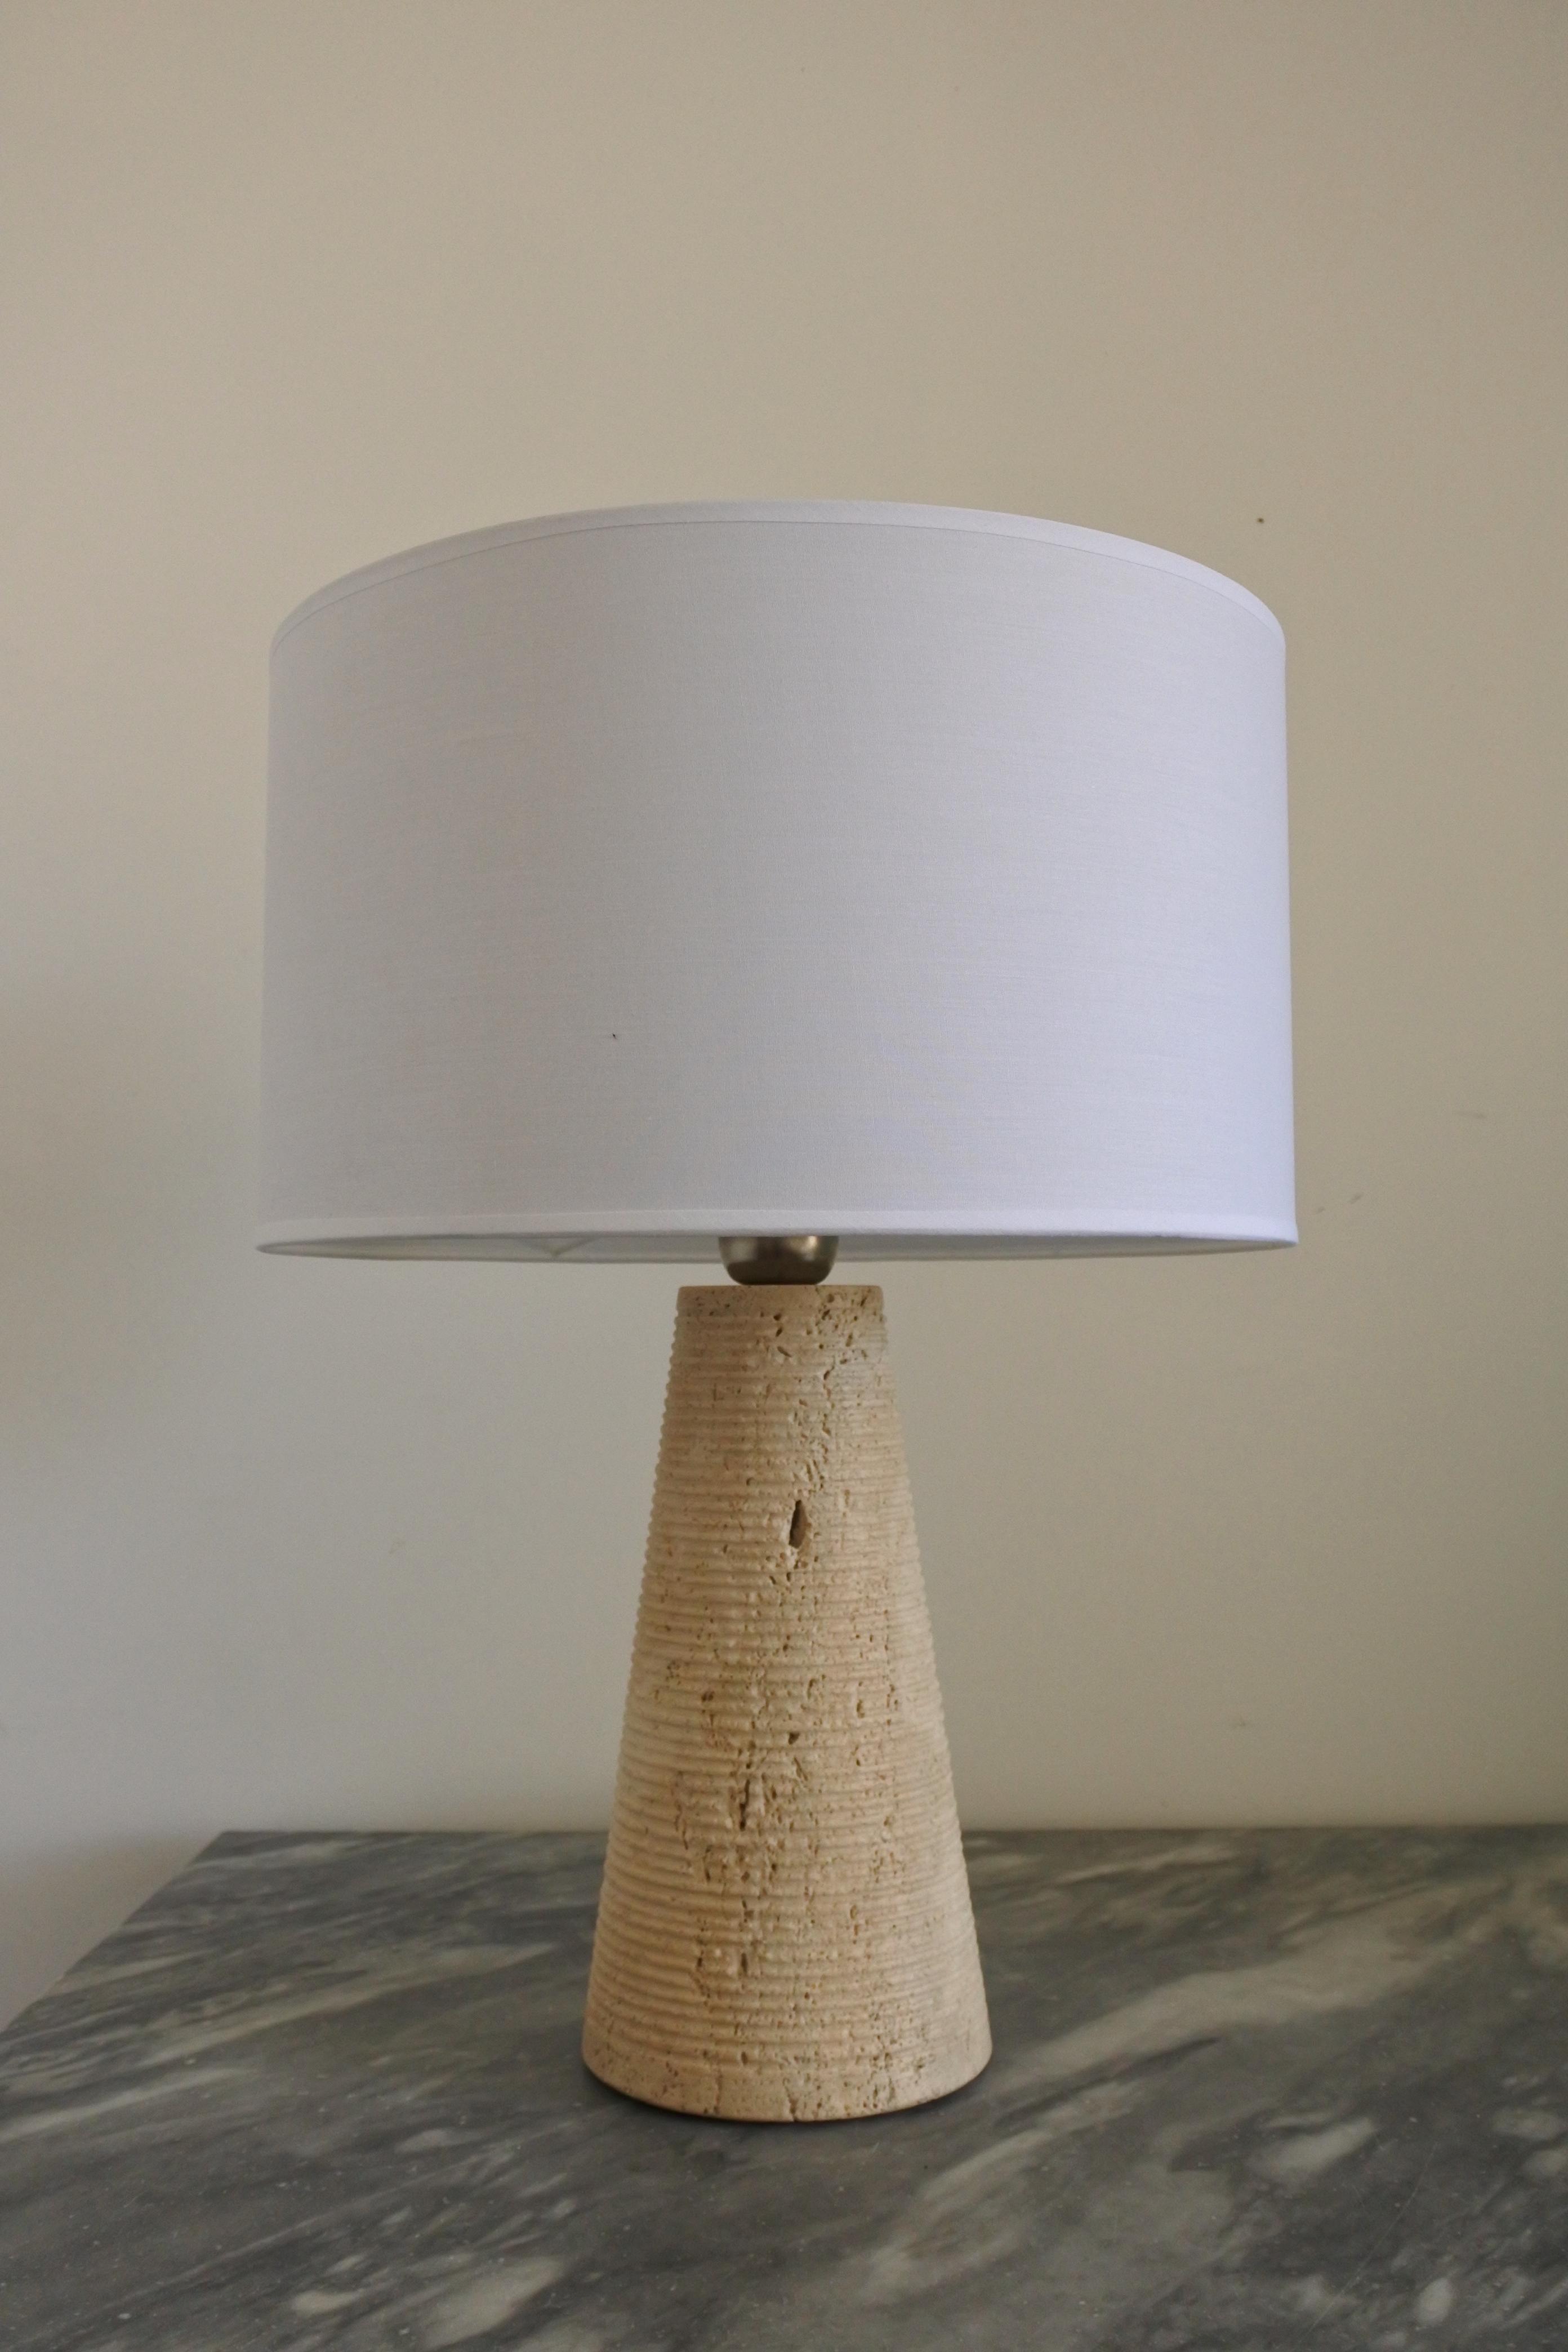 Heavy solid travertine stone table lamp
Made in Italy in the 1970s

Measurements of the lamp without the shade H 32 cm, D 14 cm

Original electrical system. To be safe, the lamp should be checked locally by a specialist to fully comply with